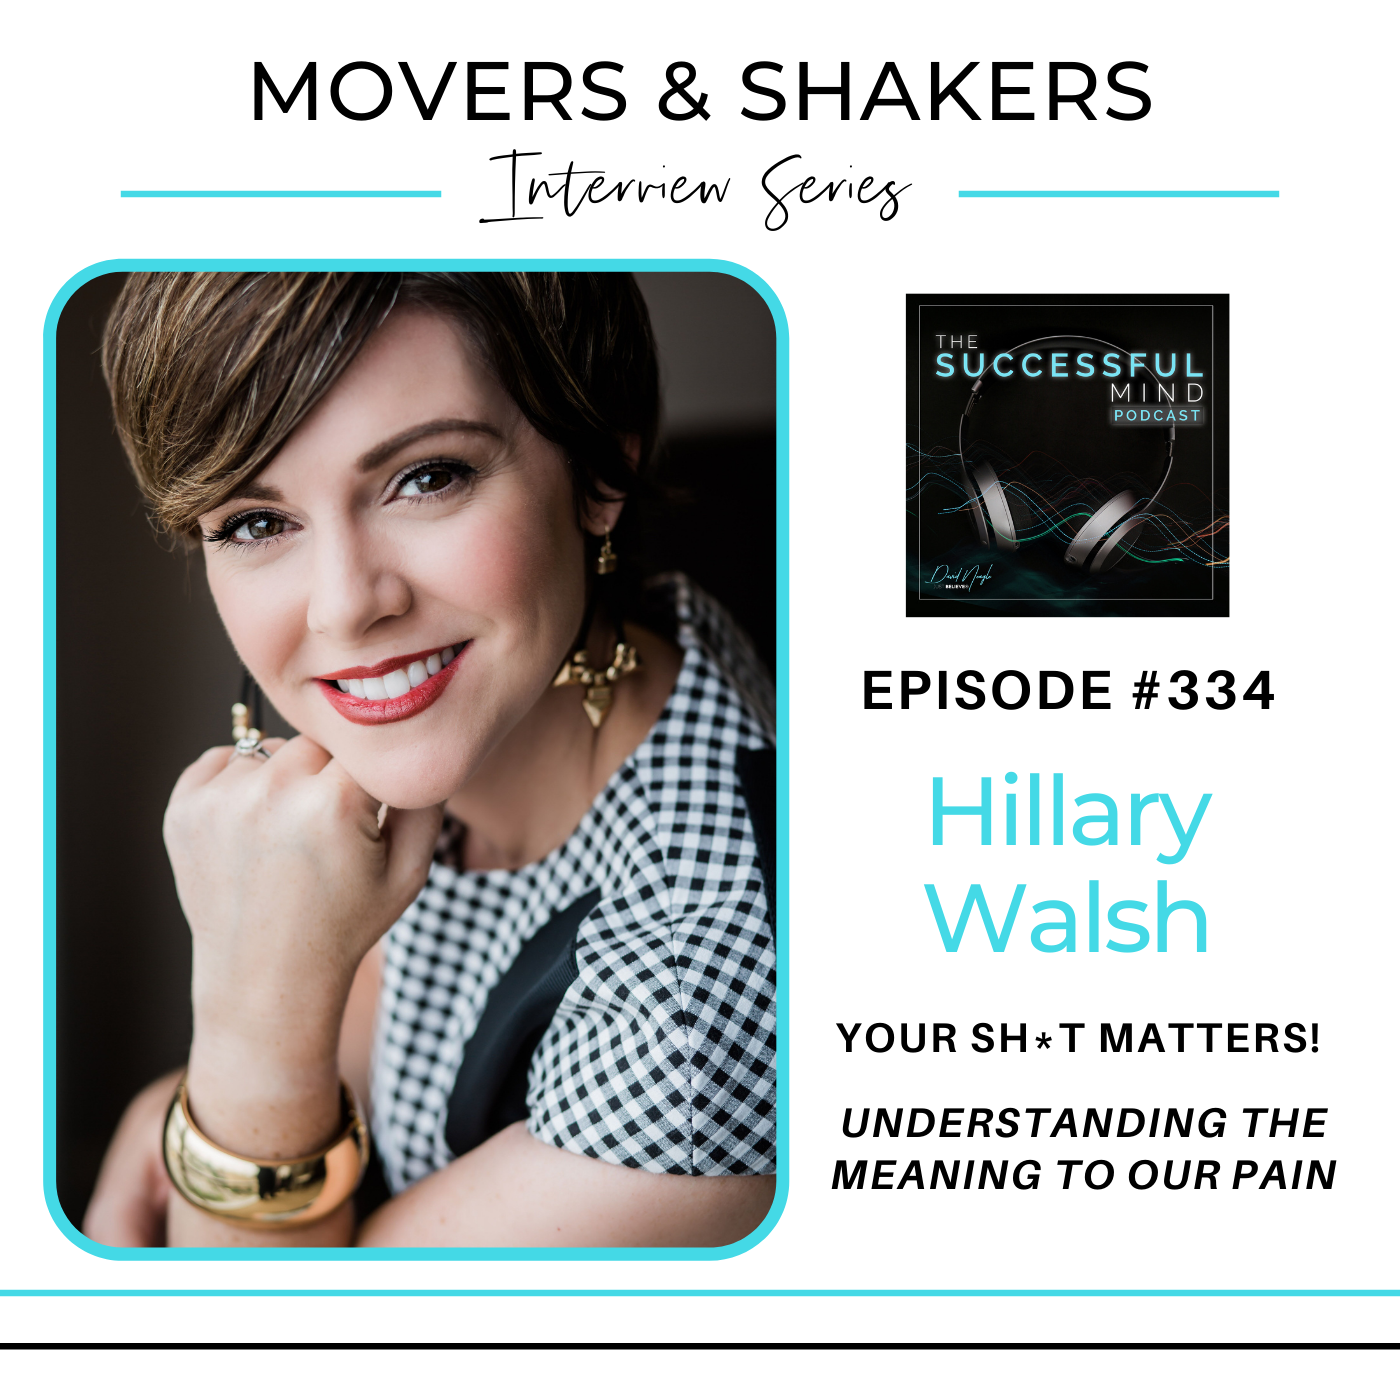 Movers & Shakers - Episode 334 - Hillary Walsh - New Frontier Immigration